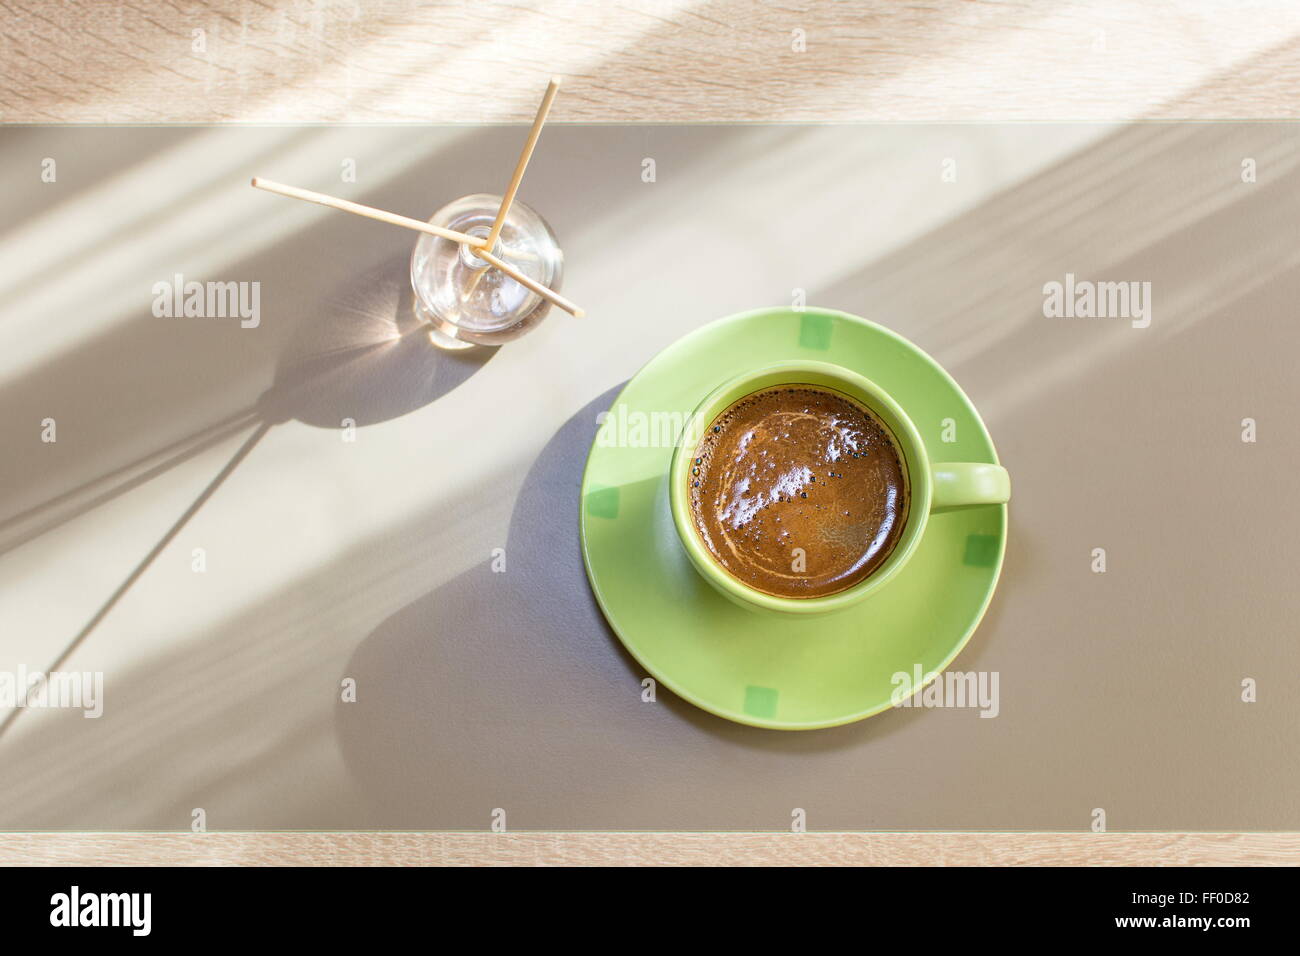 green cup of coffee and incense sticks in natural light Stock Photo